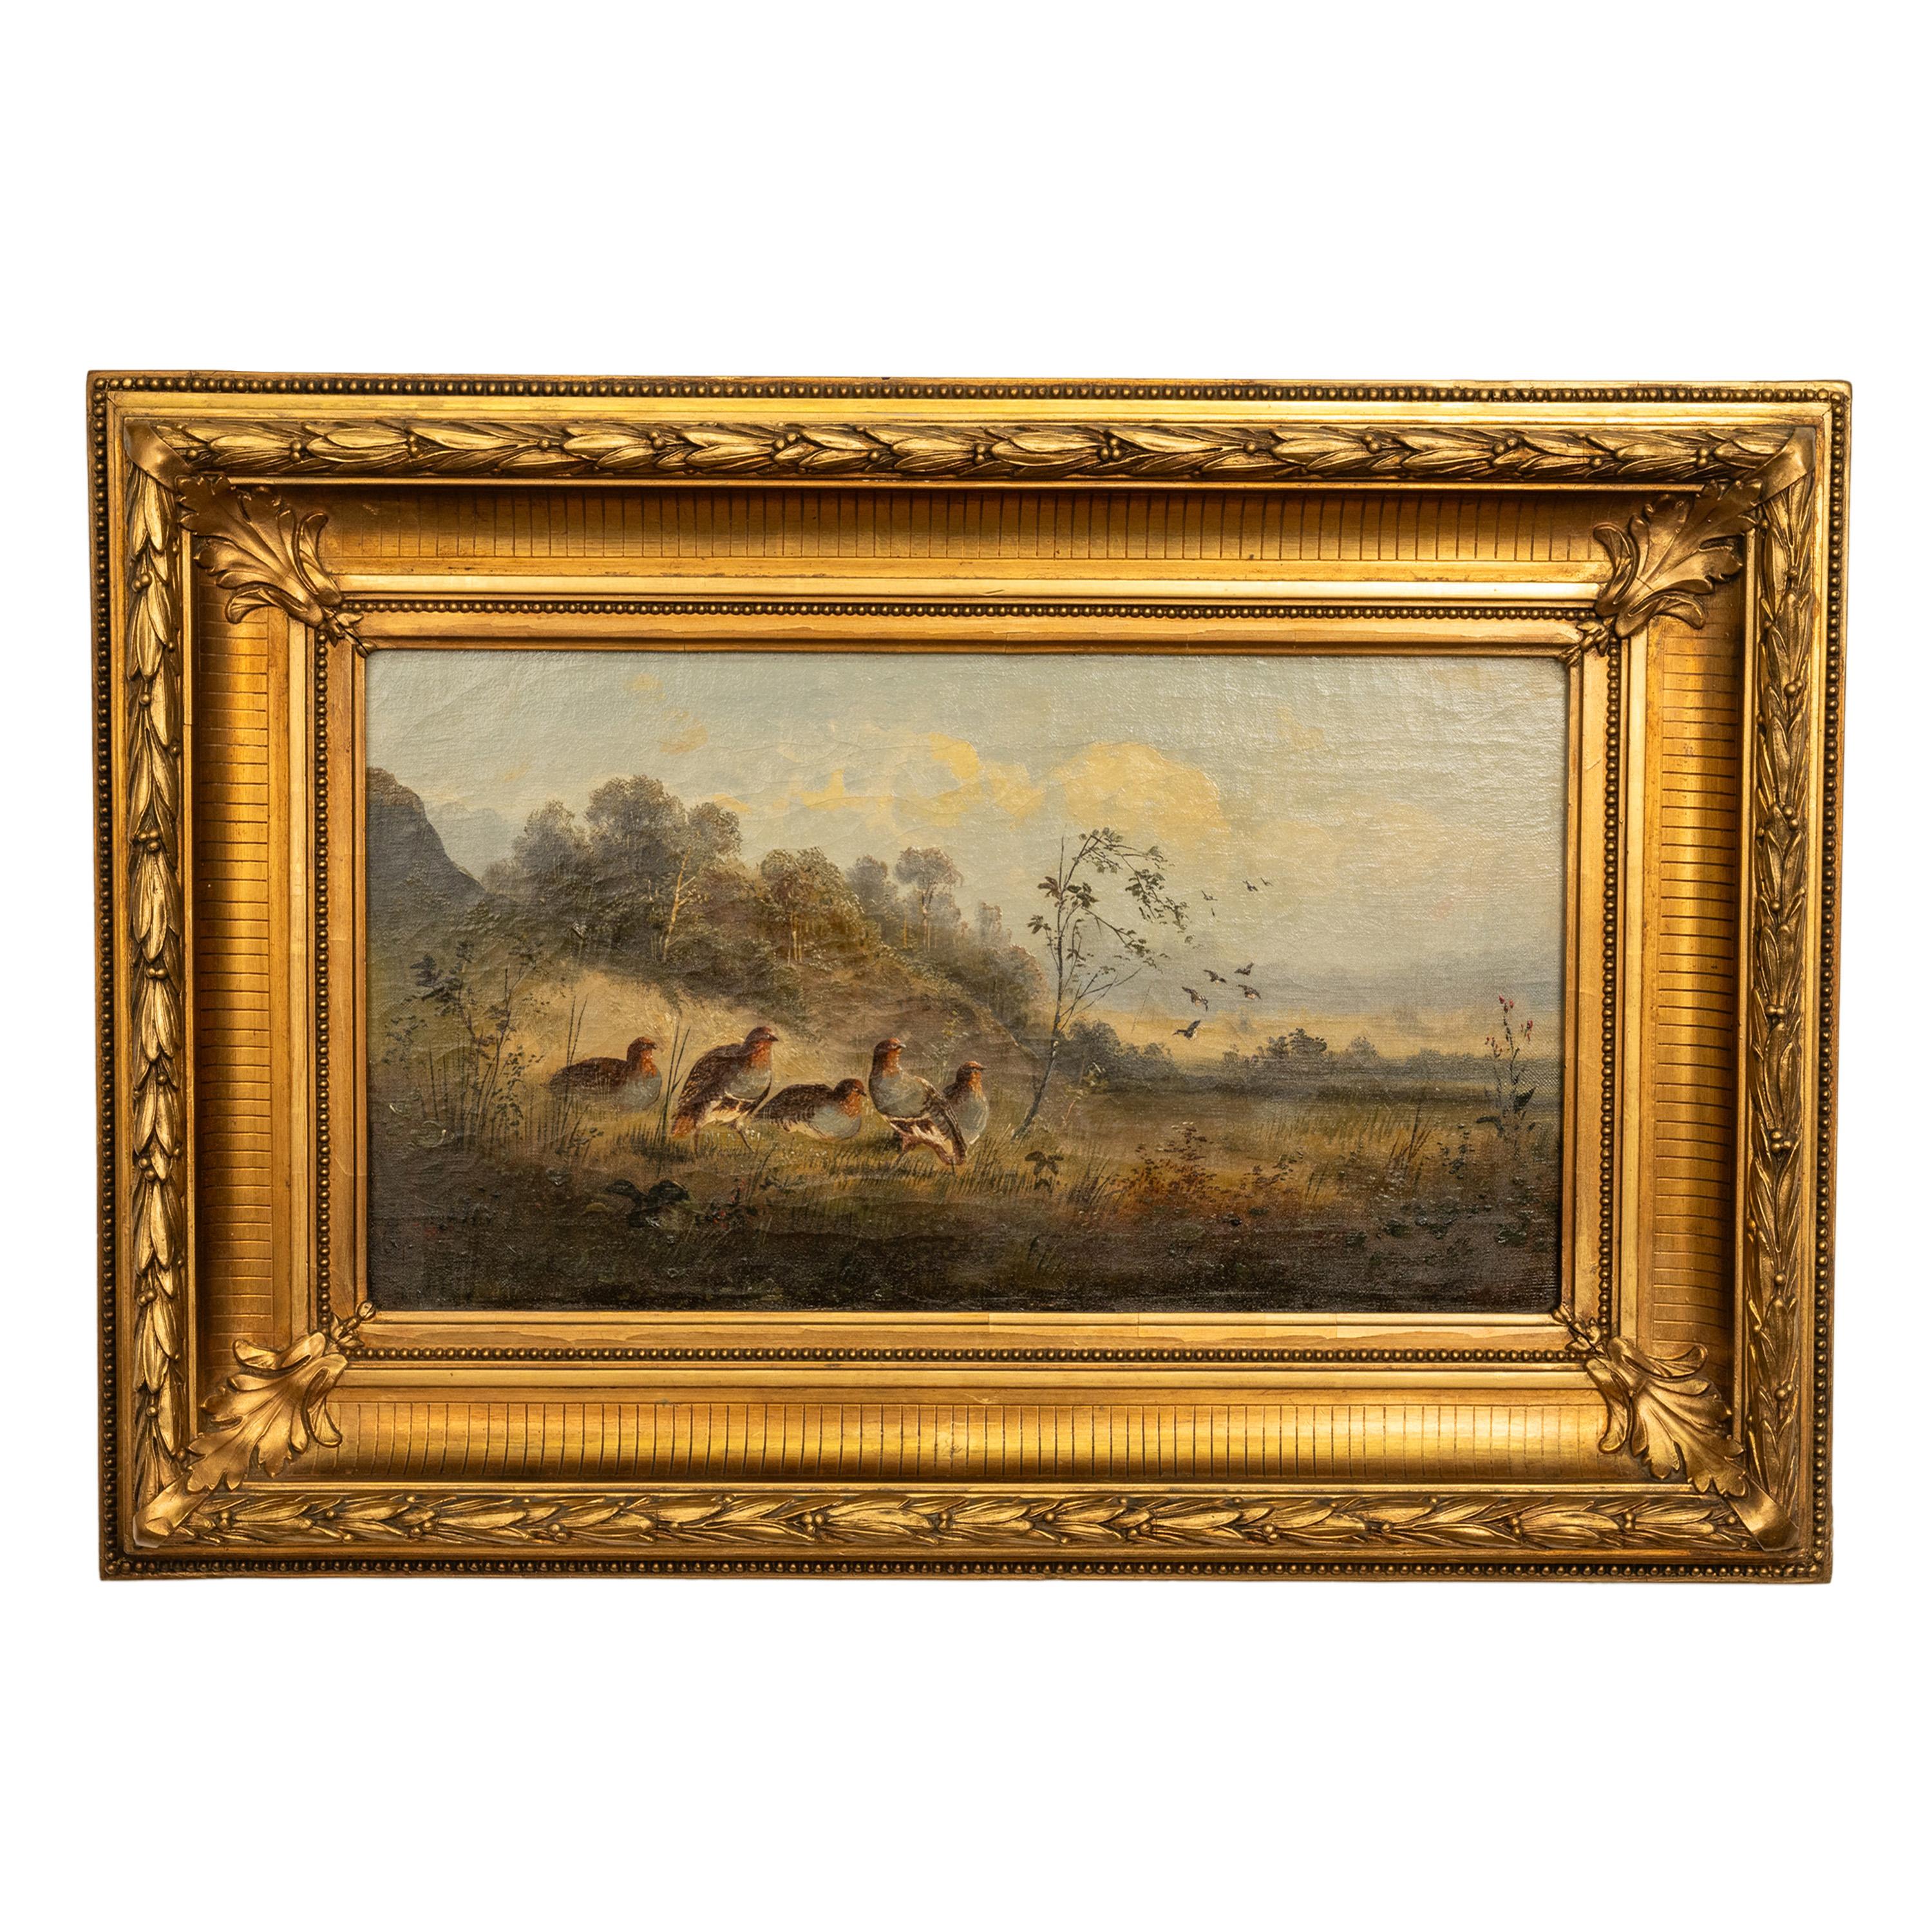 Pair Fine Antique American Oil on Canvas California Landscapes Thomas Hill 1875 1